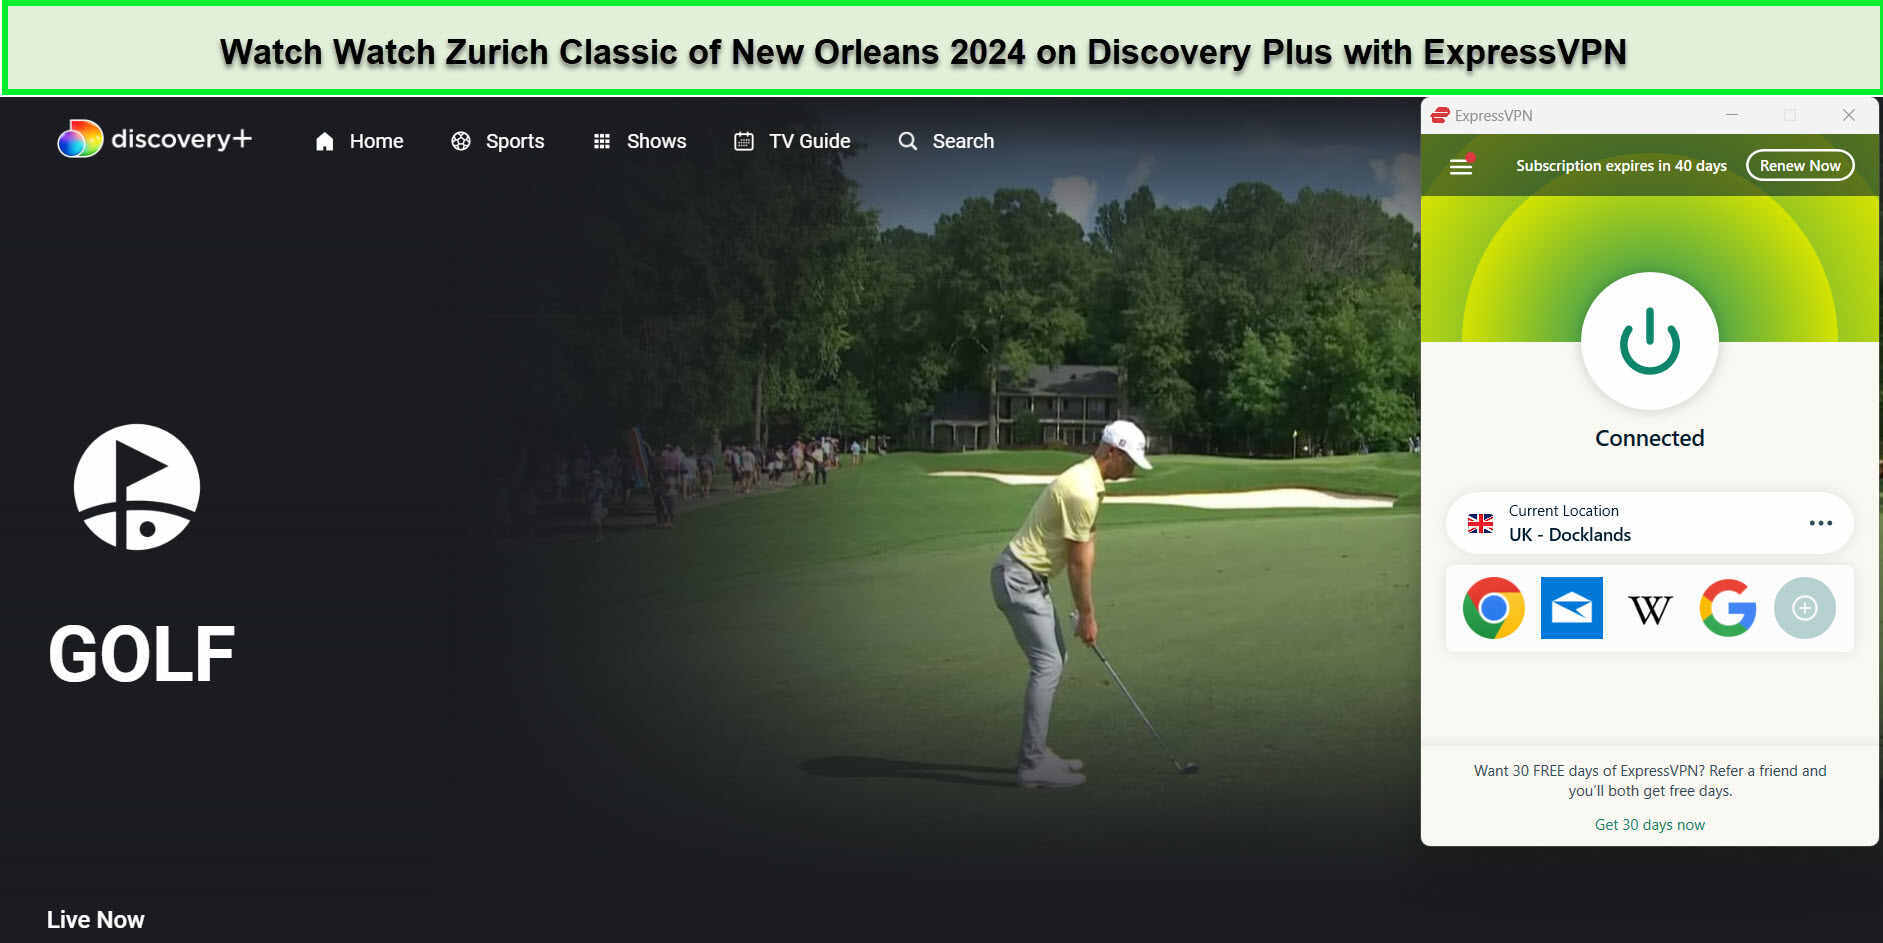 Watch-Zurich-Classic-of-New-Orleans-2024-in-Canada-On-Discovery-Plus-with-ExpressVPN